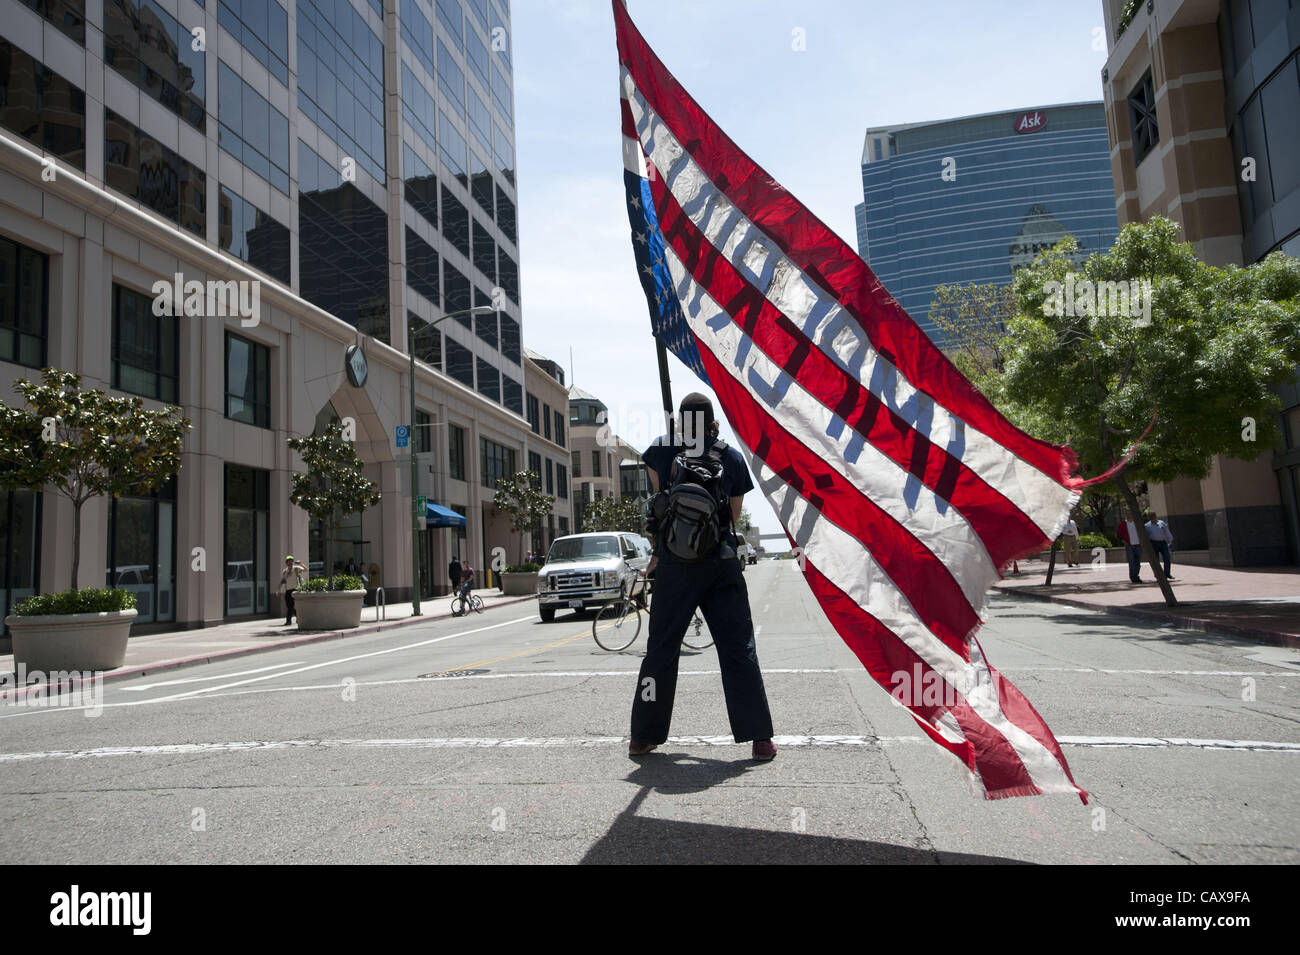 May 1, 2012 - Oakland, California, U.S - Occuply Oakland protesters face off against the Oakland Police department in downtown Oakland during May Day protests. (Credit Image: © Mark Murrmann/ZUMAPRESS.com) Stock Photo